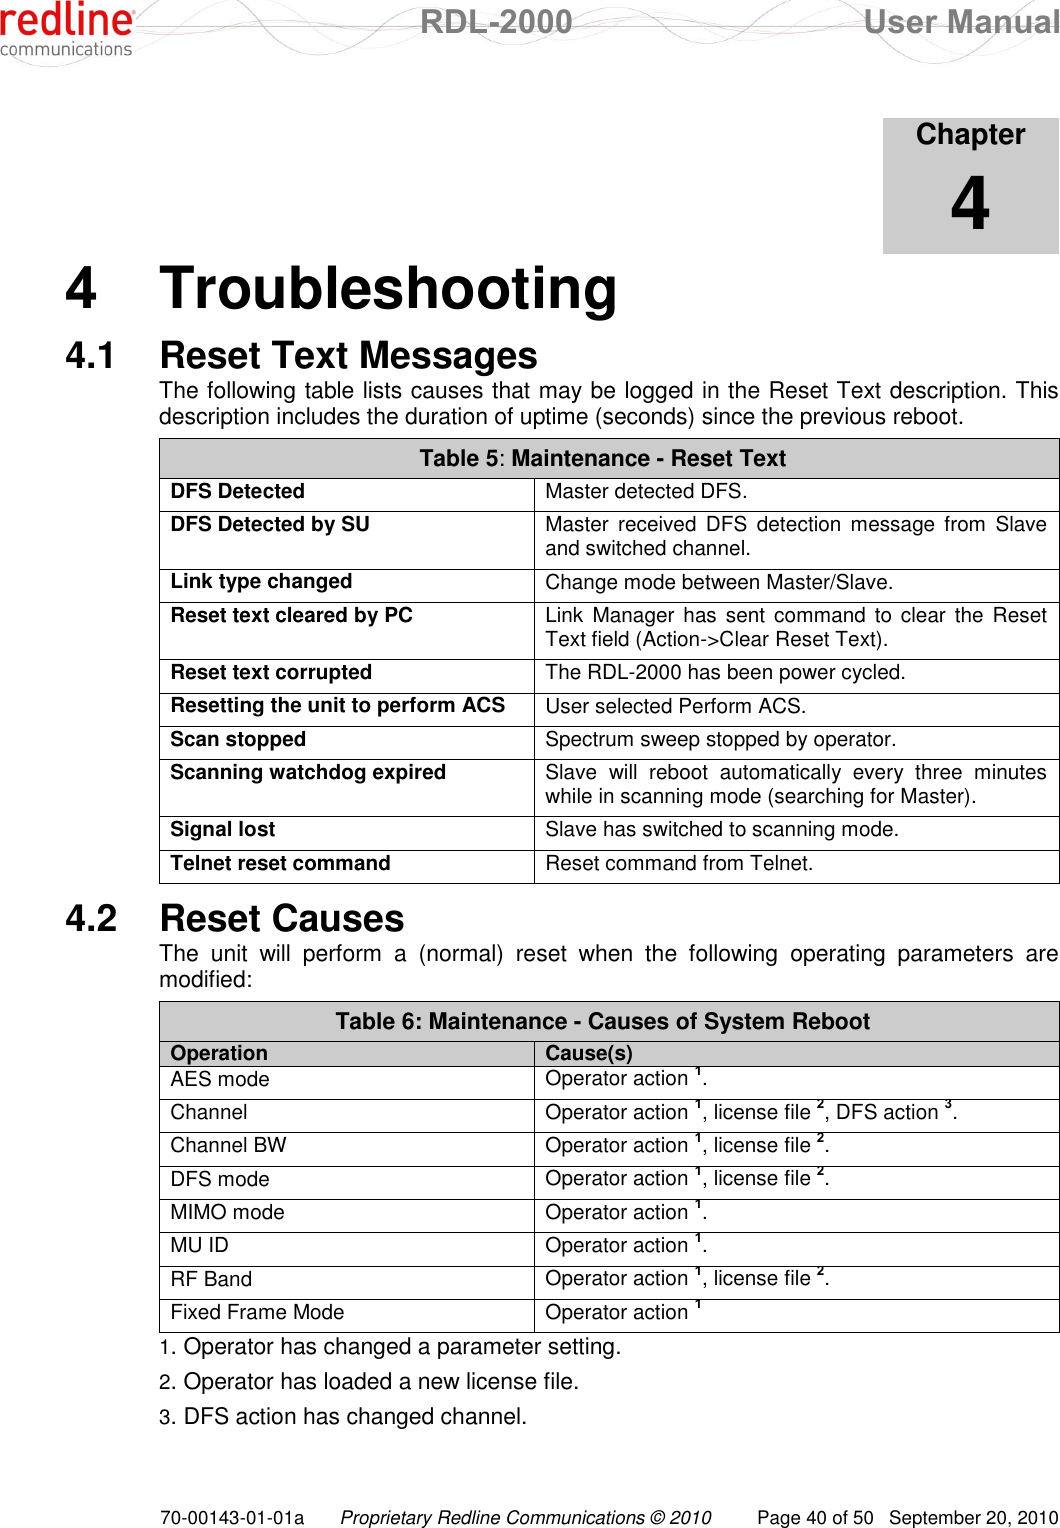  RDL-2000  User Manual 70-00143-01-01a Proprietary Redline Communications © 2010  Page 40 of 50  September 20, 2010            Chapter 4 4  Troubleshooting 4.1  Reset Text Messages The following table lists causes that may be logged in the Reset Text description. This description includes the duration of uptime (seconds) since the previous reboot. Table 5: Maintenance - Reset Text DFS Detected  Master detected DFS.  DFS Detected by SU  Master  received  DFS  detection  message  from  Slave and switched channel. Link type changed   Change mode between Master/Slave. Reset text cleared by PC Link  Manager has  sent command  to clear  the Reset Text field (Action-&gt;Clear Reset Text). Reset text corrupted  The RDL-2000 has been power cycled. Resetting the unit to perform ACS  User selected Perform ACS. Scan stopped  Spectrum sweep stopped by operator. Scanning watchdog expired  Slave  will  reboot  automatically  every  three  minutes while in scanning mode (searching for Master). Signal lost  Slave has switched to scanning mode. Telnet reset command  Reset command from Telnet. 4.2  Reset Causes The  unit  will  perform  a  (normal)  reset  when  the  following  operating  parameters  are modified: Table 6: Maintenance - Causes of System Reboot Operation Cause(s) AES mode Operator action 1. Channel Operator action 1, license file 2, DFS action 3. Channel BW Operator action 1, license file 2. DFS mode Operator action 1, license file 2. MIMO mode Operator action 1. MU ID Operator action 1. RF Band Operator action 1, license file 2. Fixed Frame Mode Operator action 1 1. Operator has changed a parameter setting.  2. Operator has loaded a new license file.  3. DFS action has changed channel. 